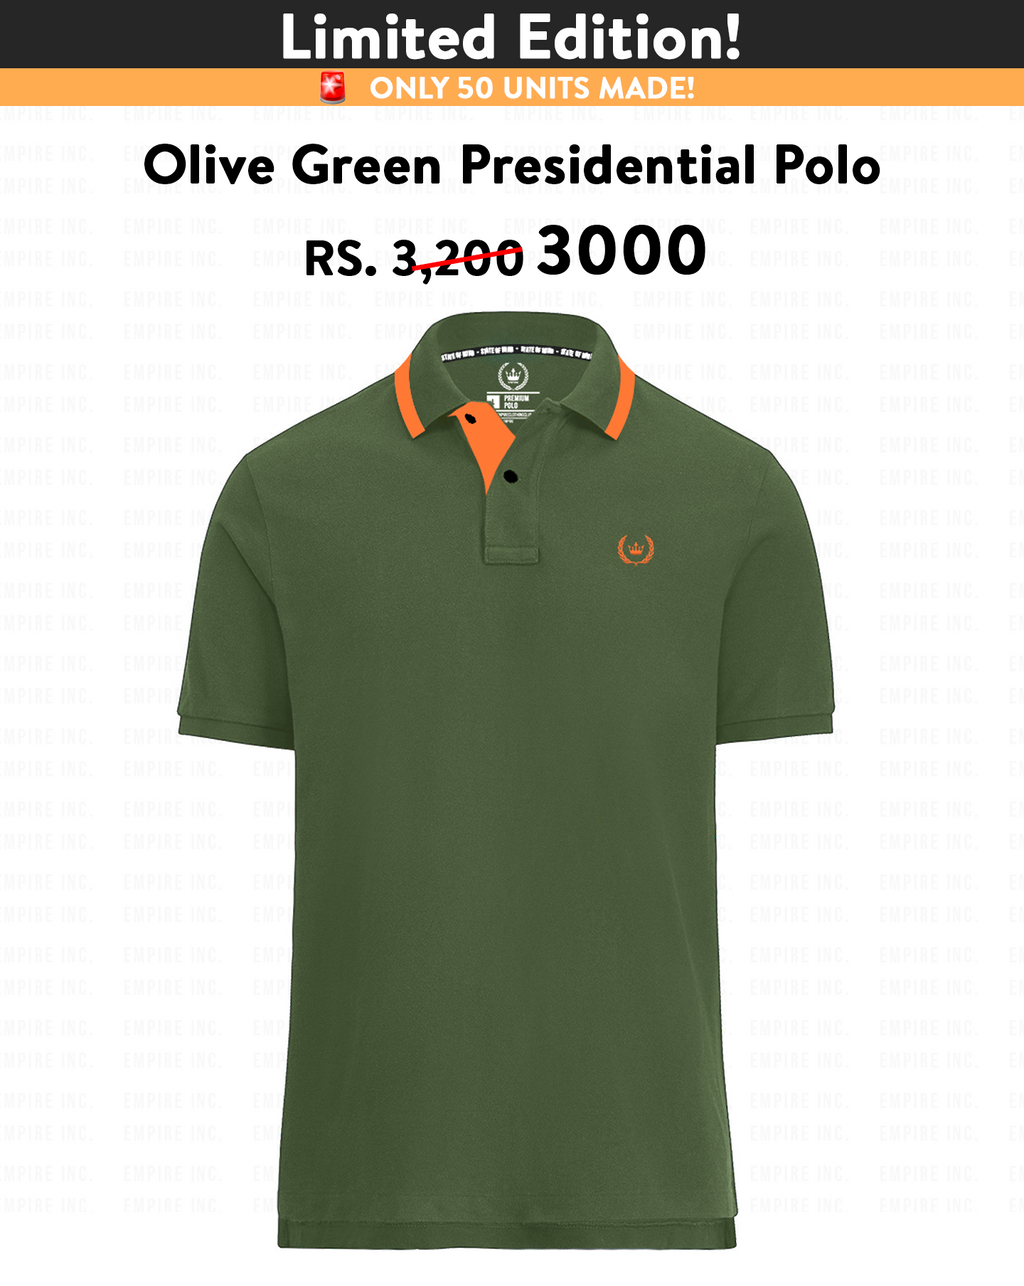 Olive Green Presidential Polo